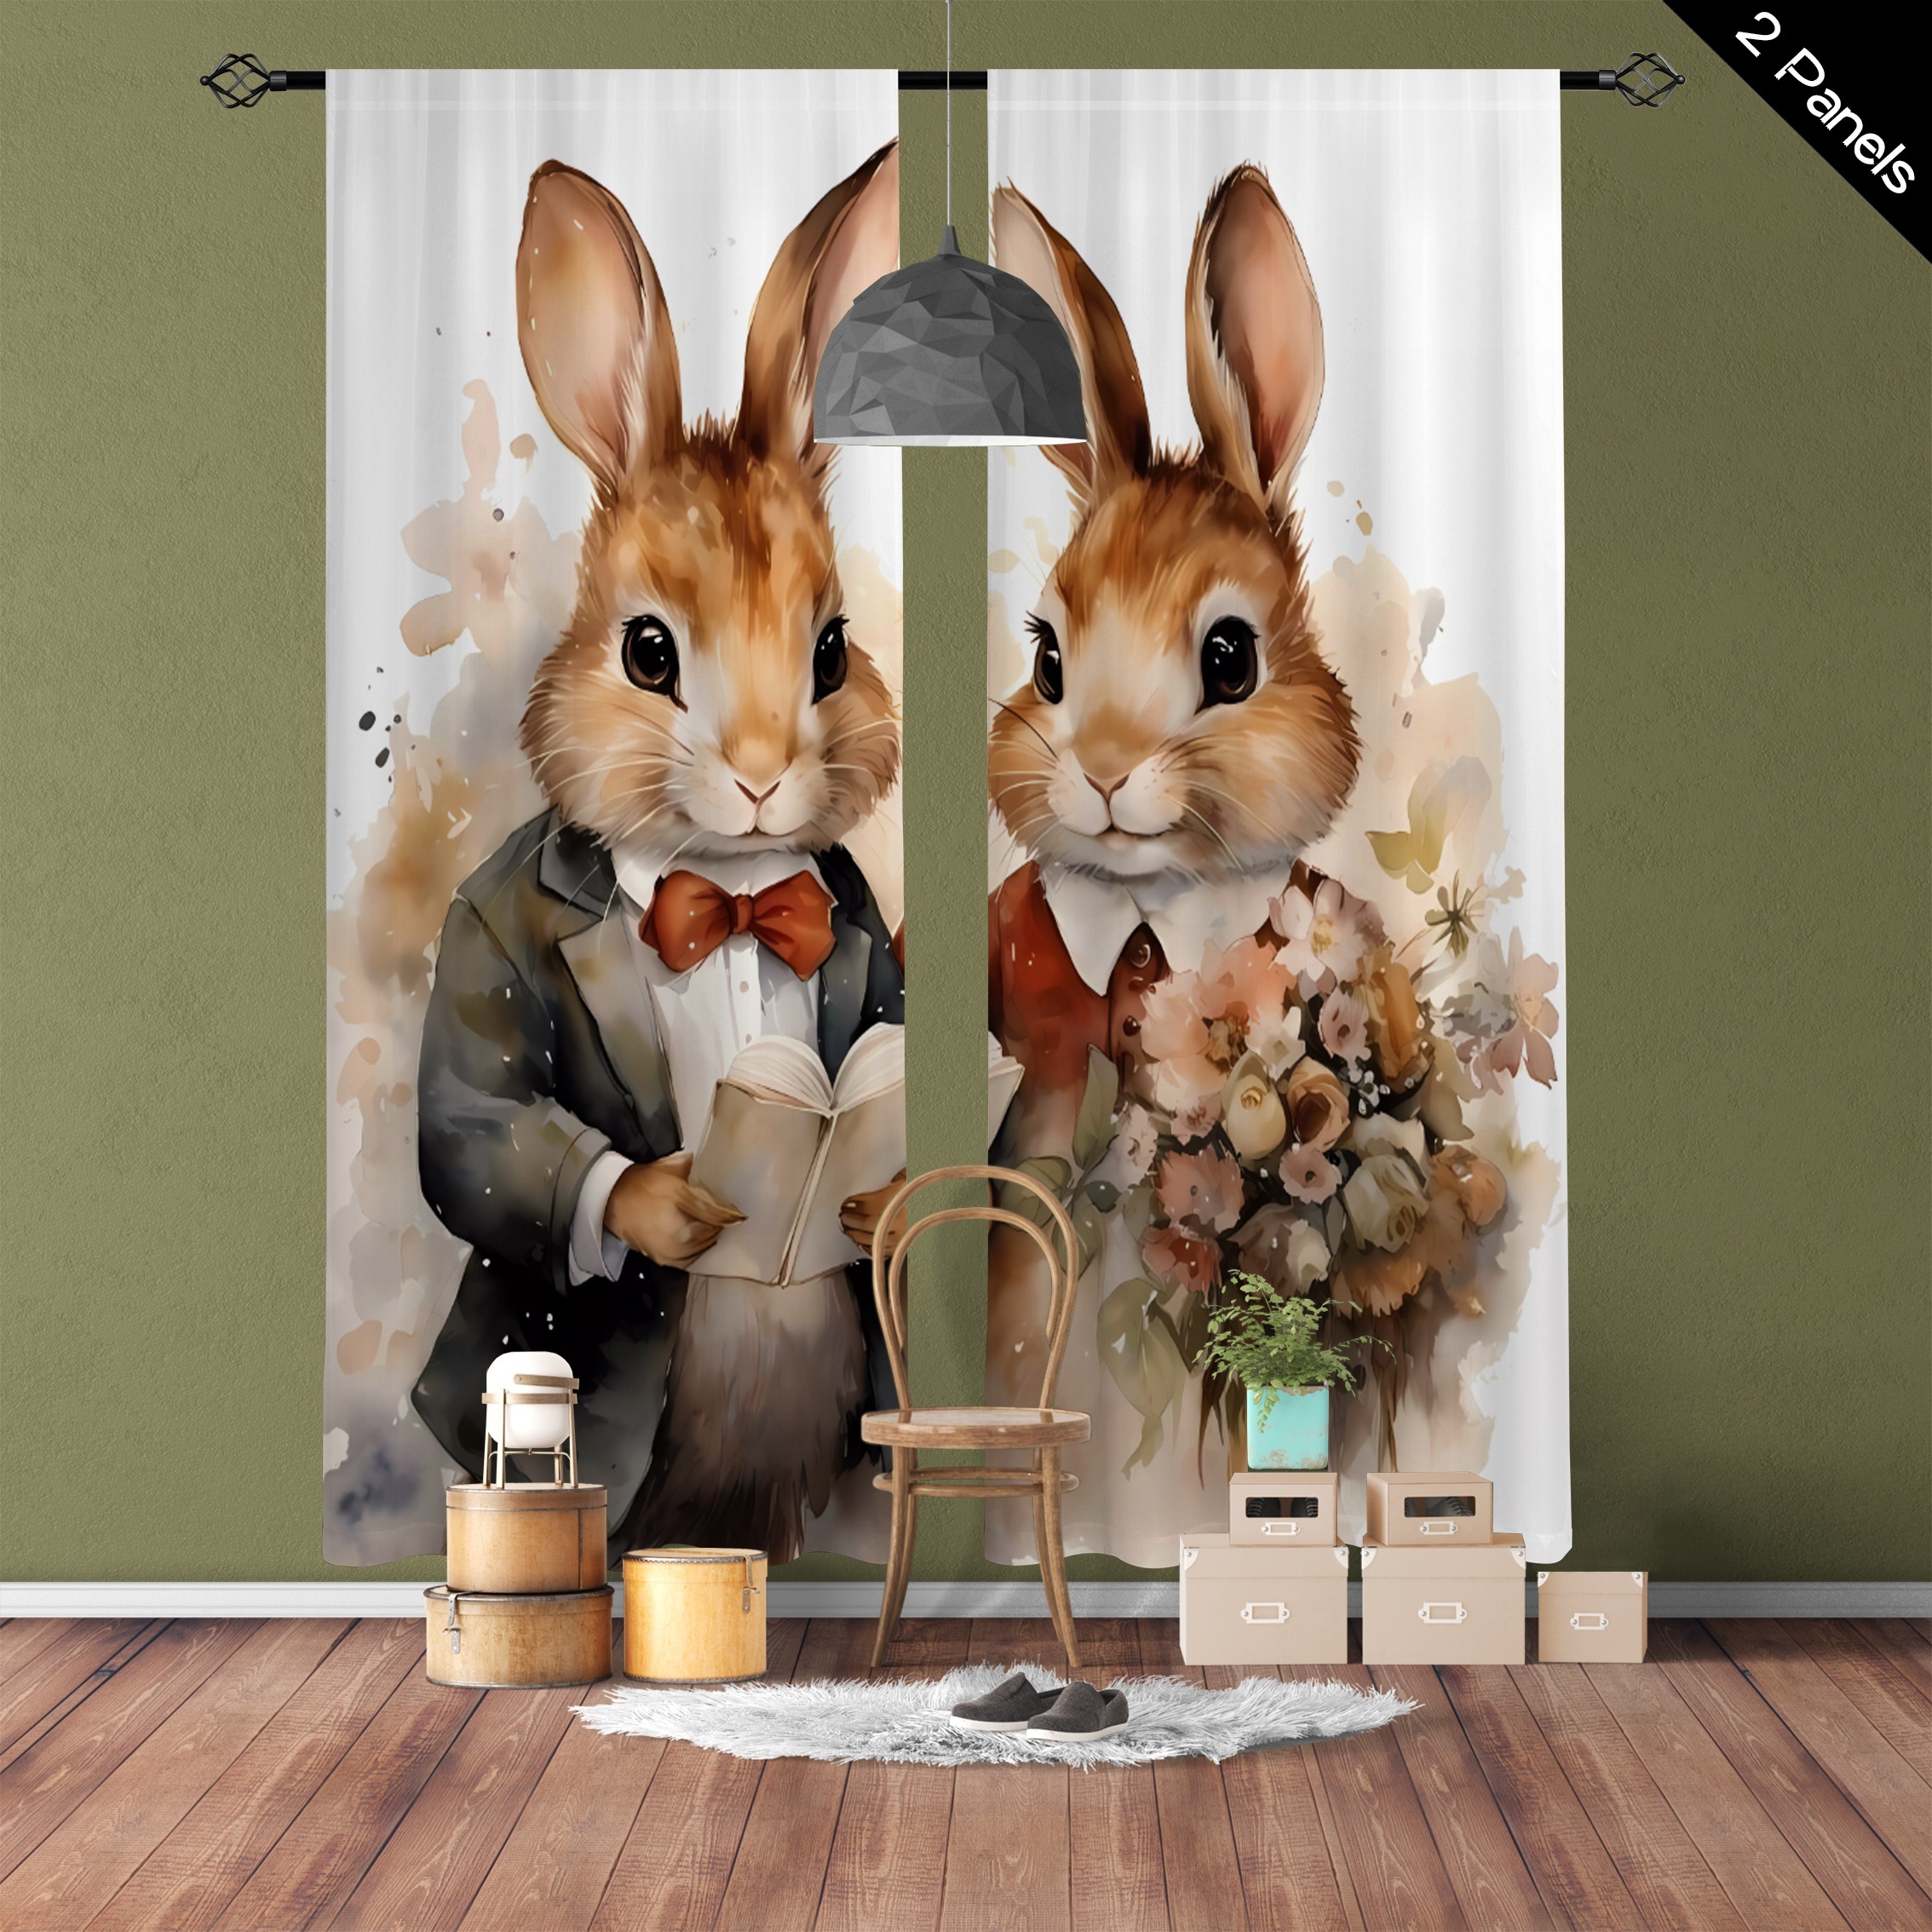 

2pcs, Easter Bunny Wedding Couple Printed Translucent Curtains, Living Room Playroom Bedroom Multi-scene Polyester Rod Pocket Decorative Curtains Home Decor Party Supplies